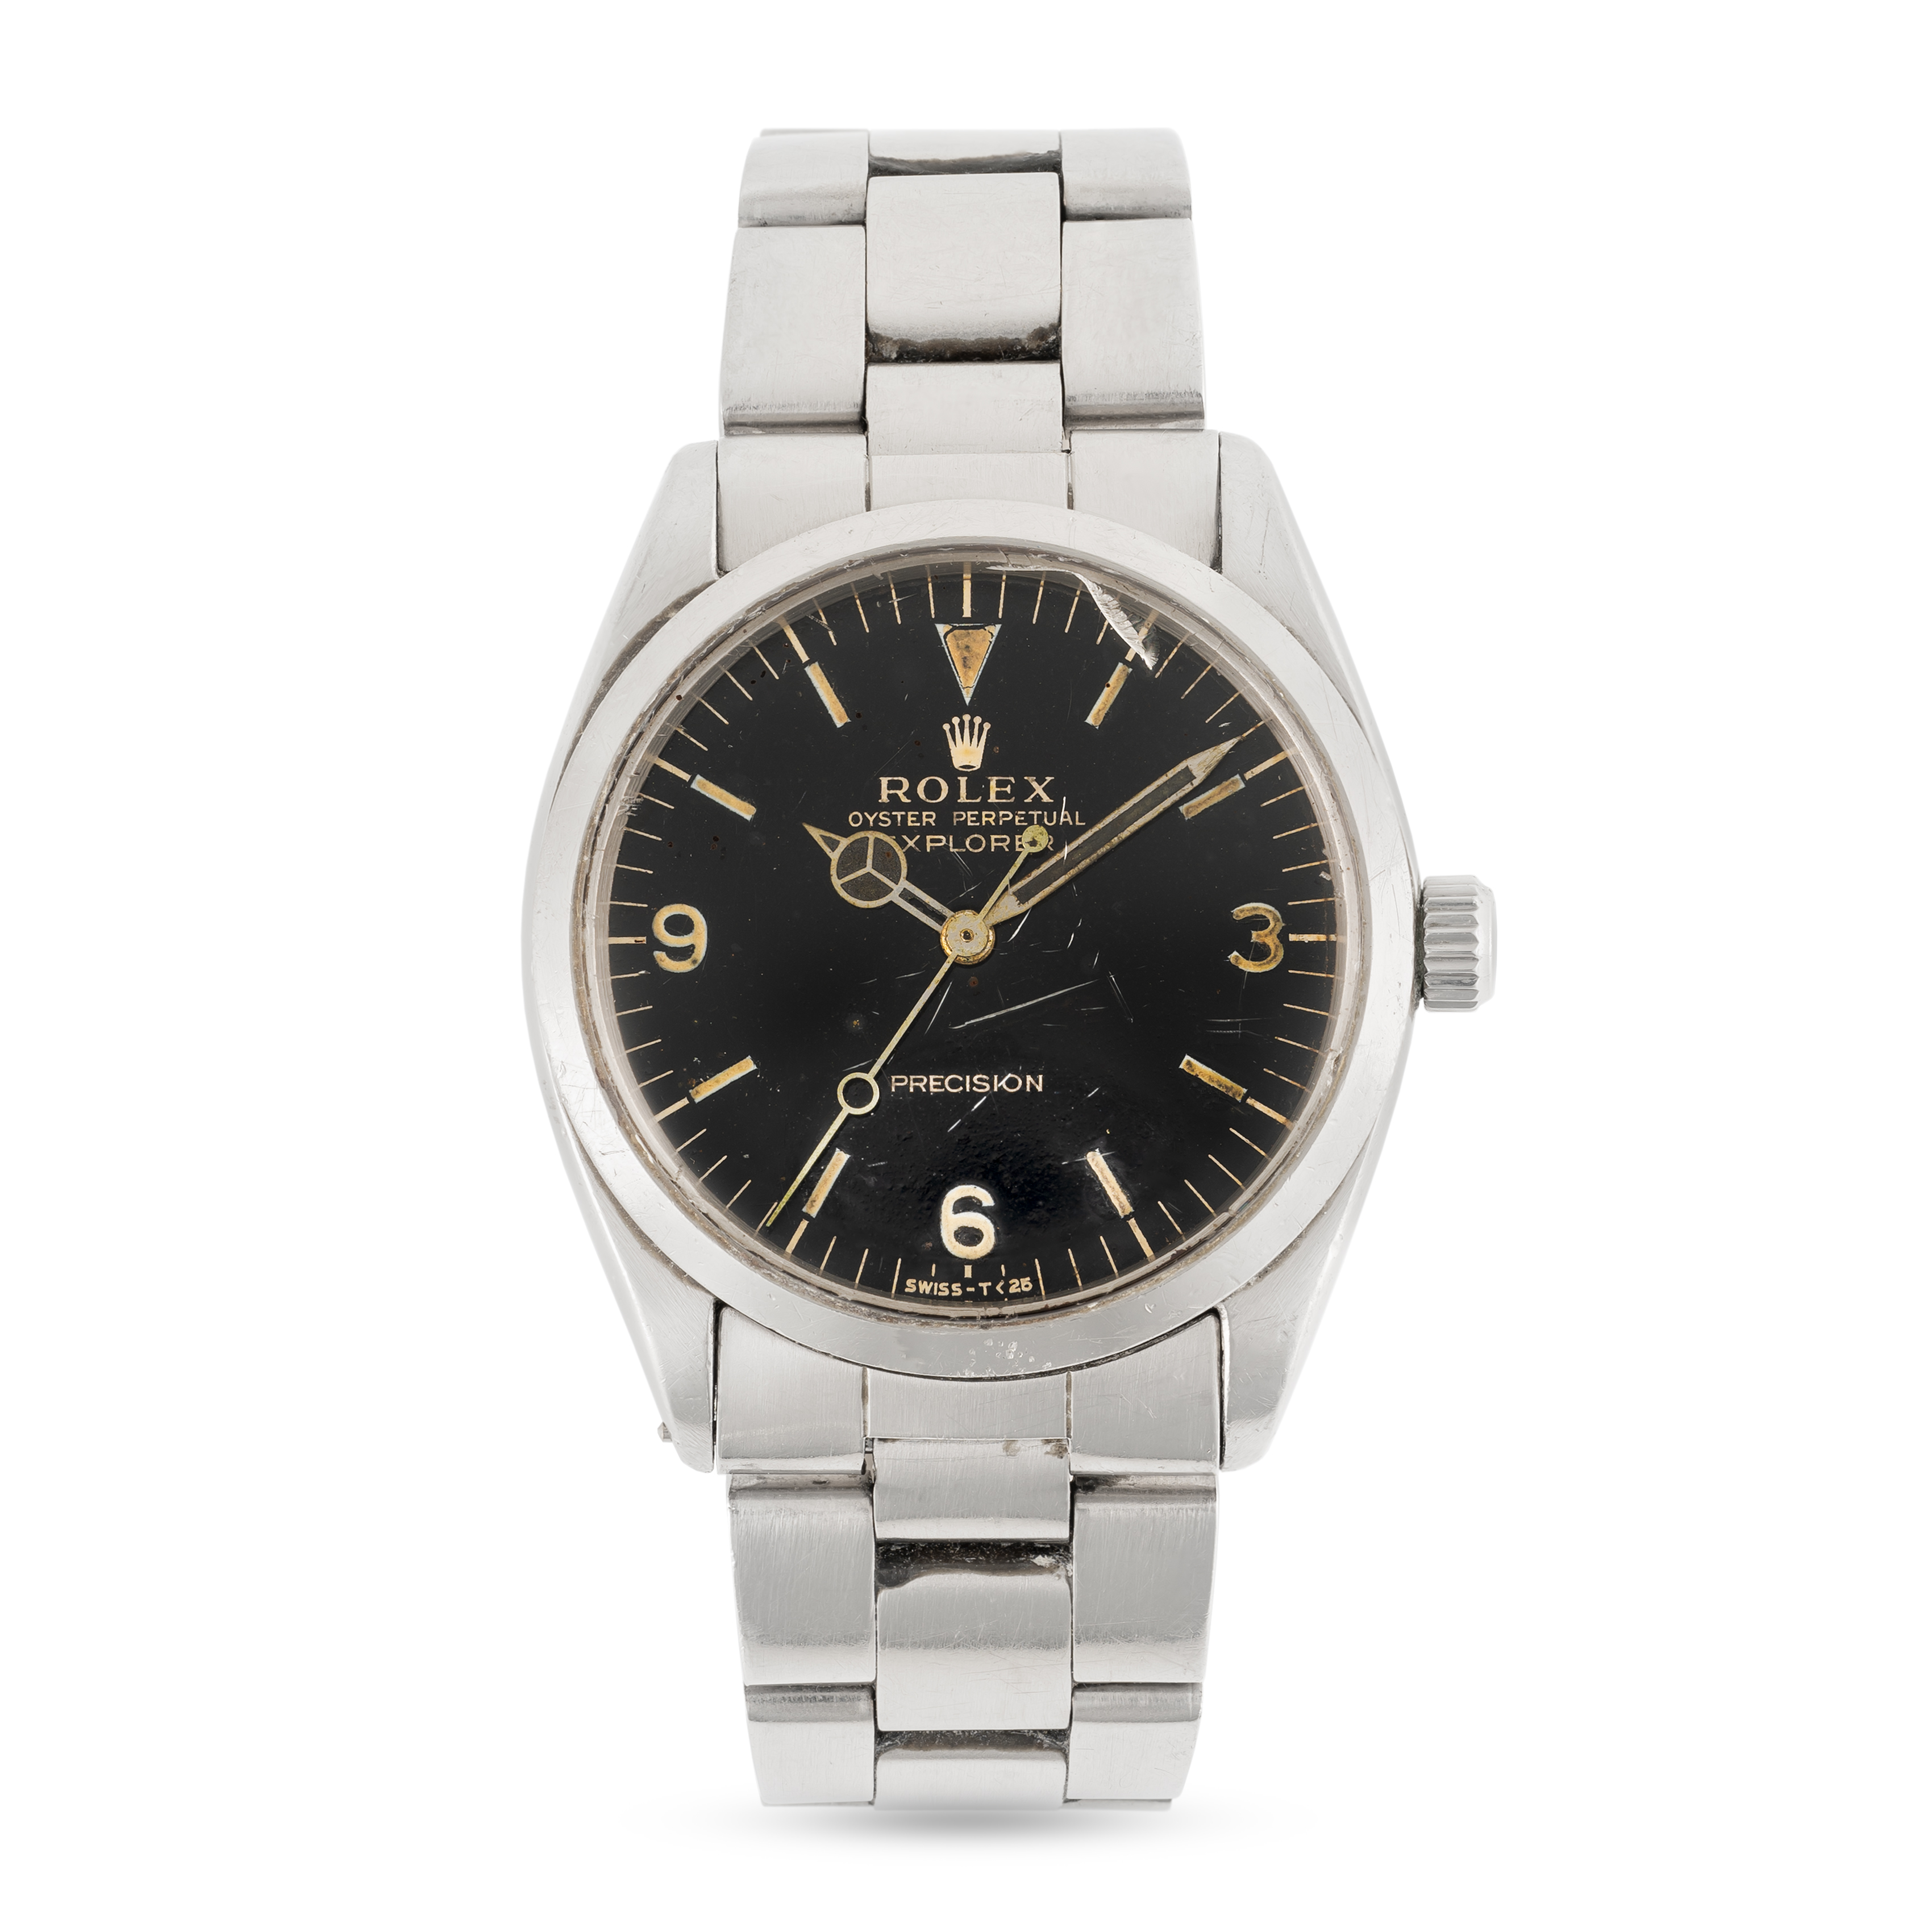 A GENTLEMAN'S SIZE STAINLESS STEEL ROLEX OYSTER PERPETUAL EXPLORER PRECISION BRACELET WATCH CIRCA - Image 3 of 11